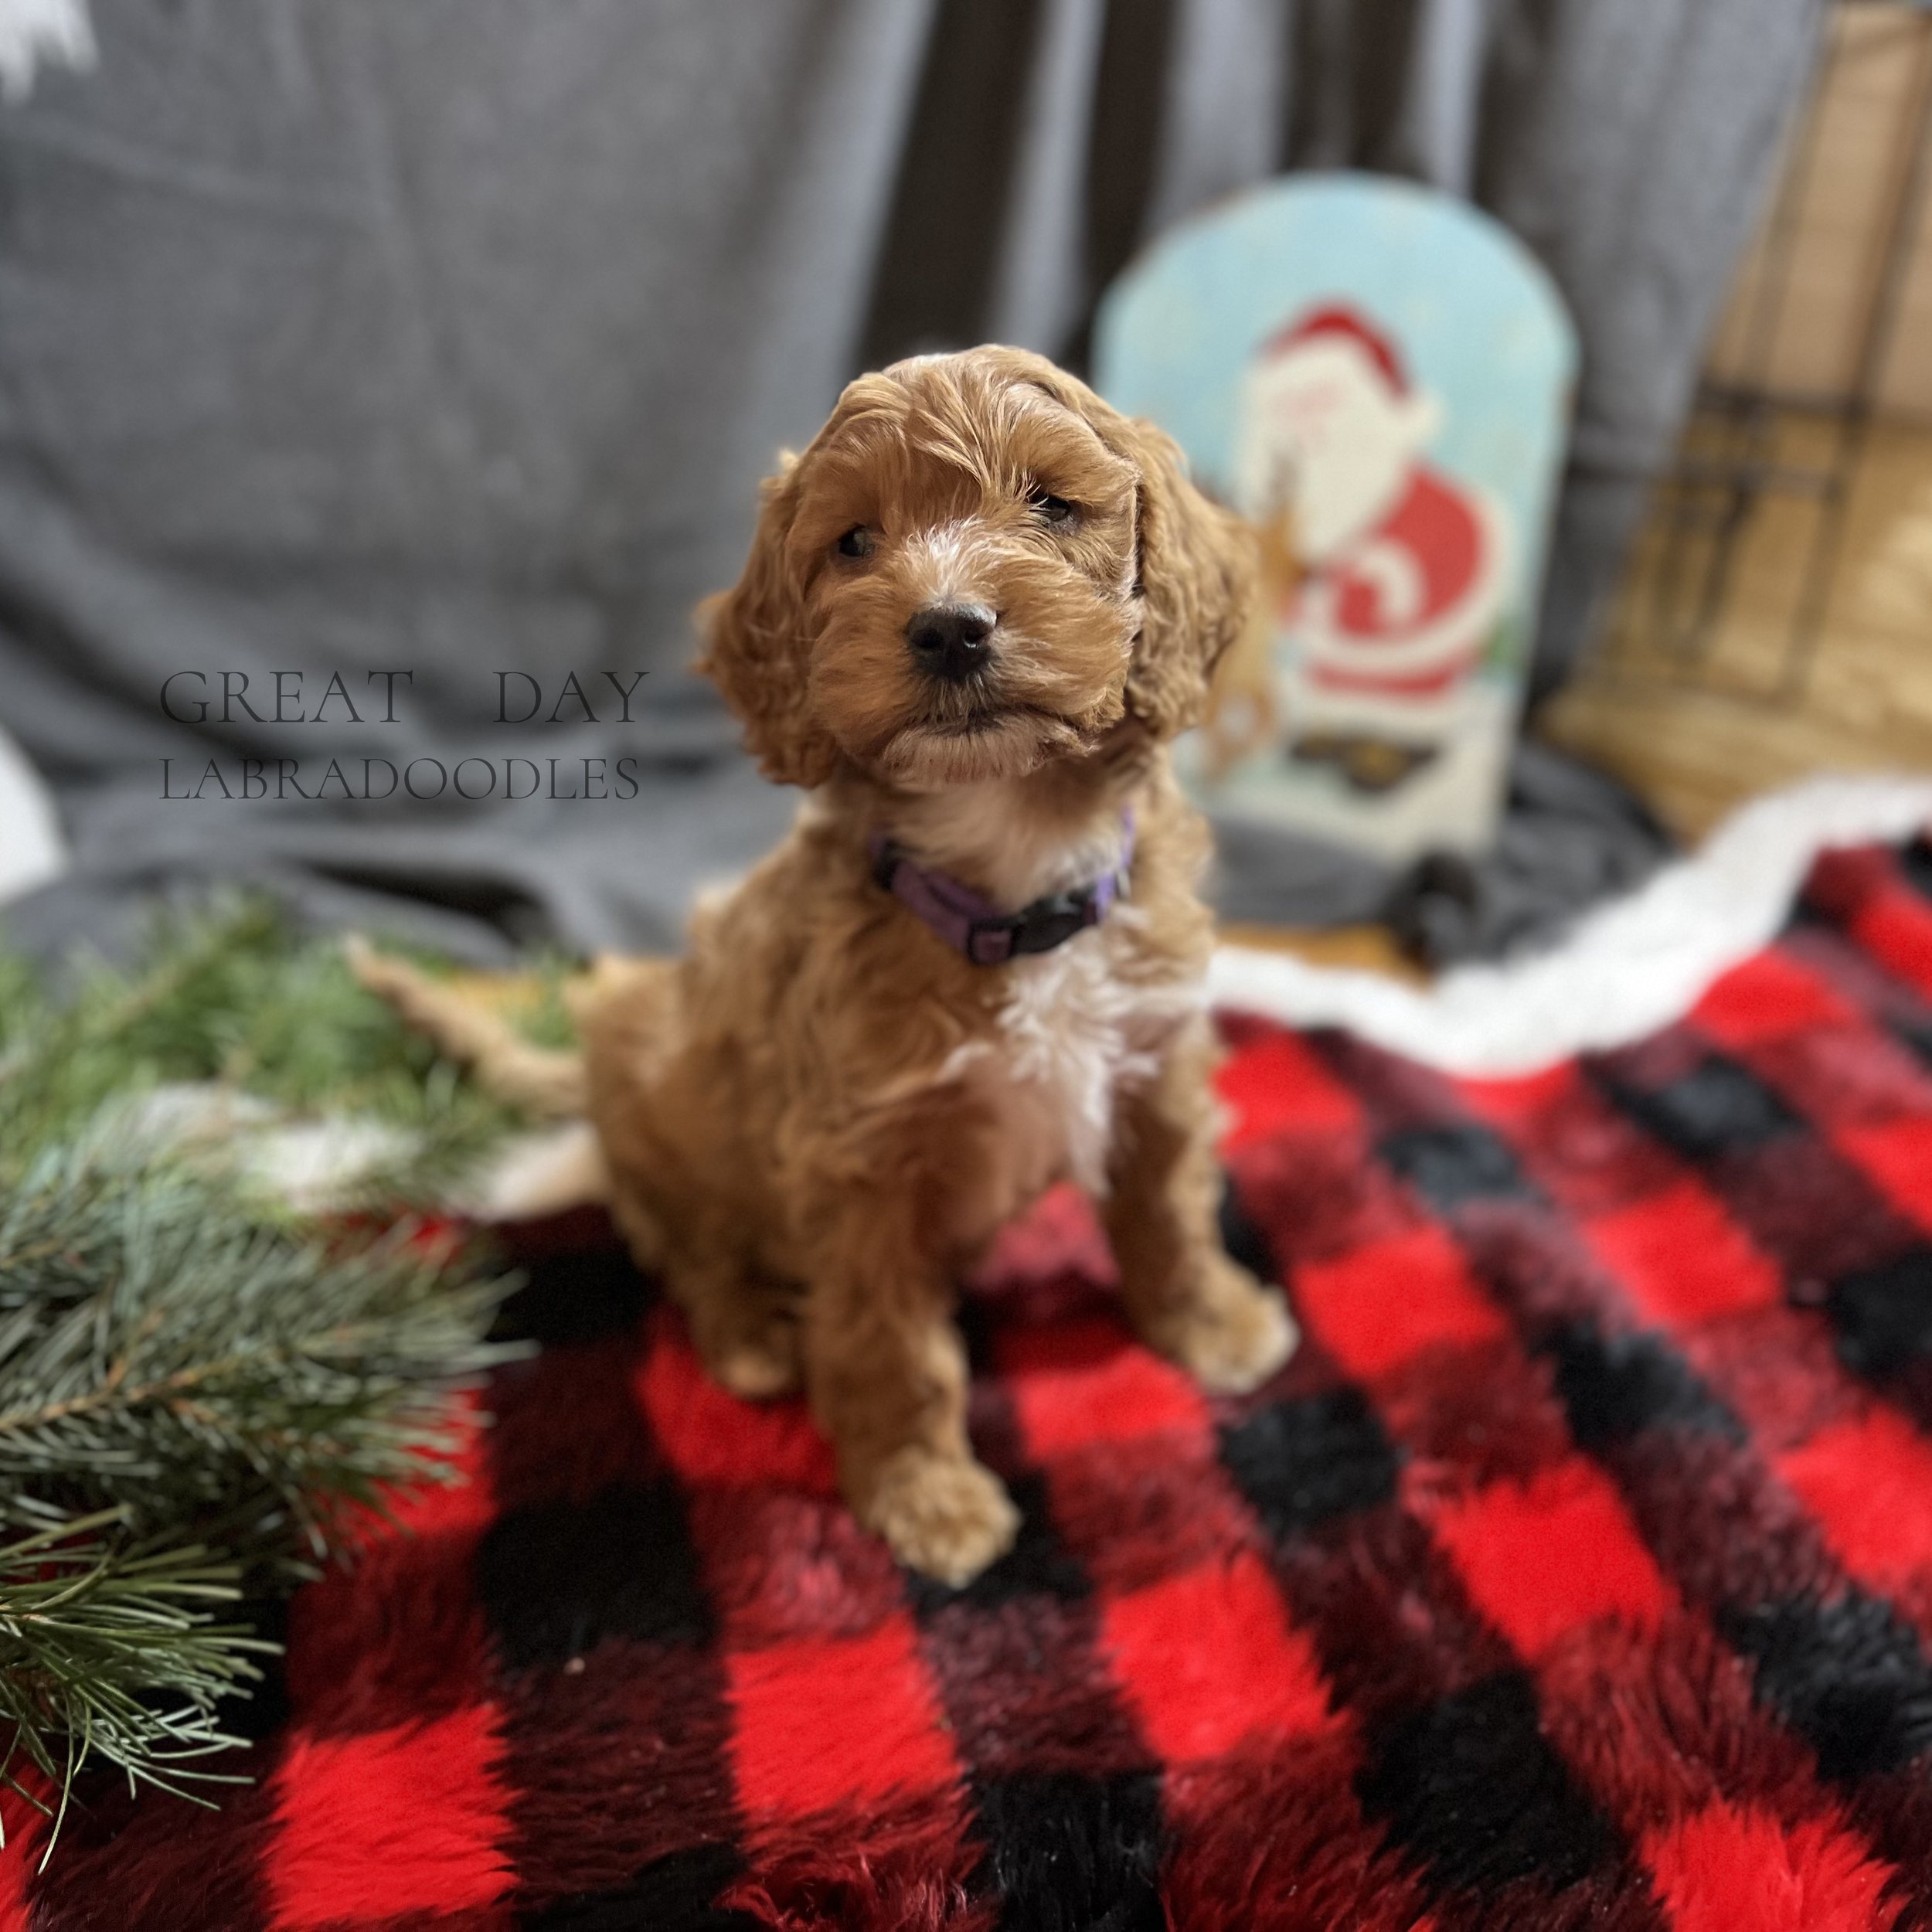 apricot labradoodle puppy